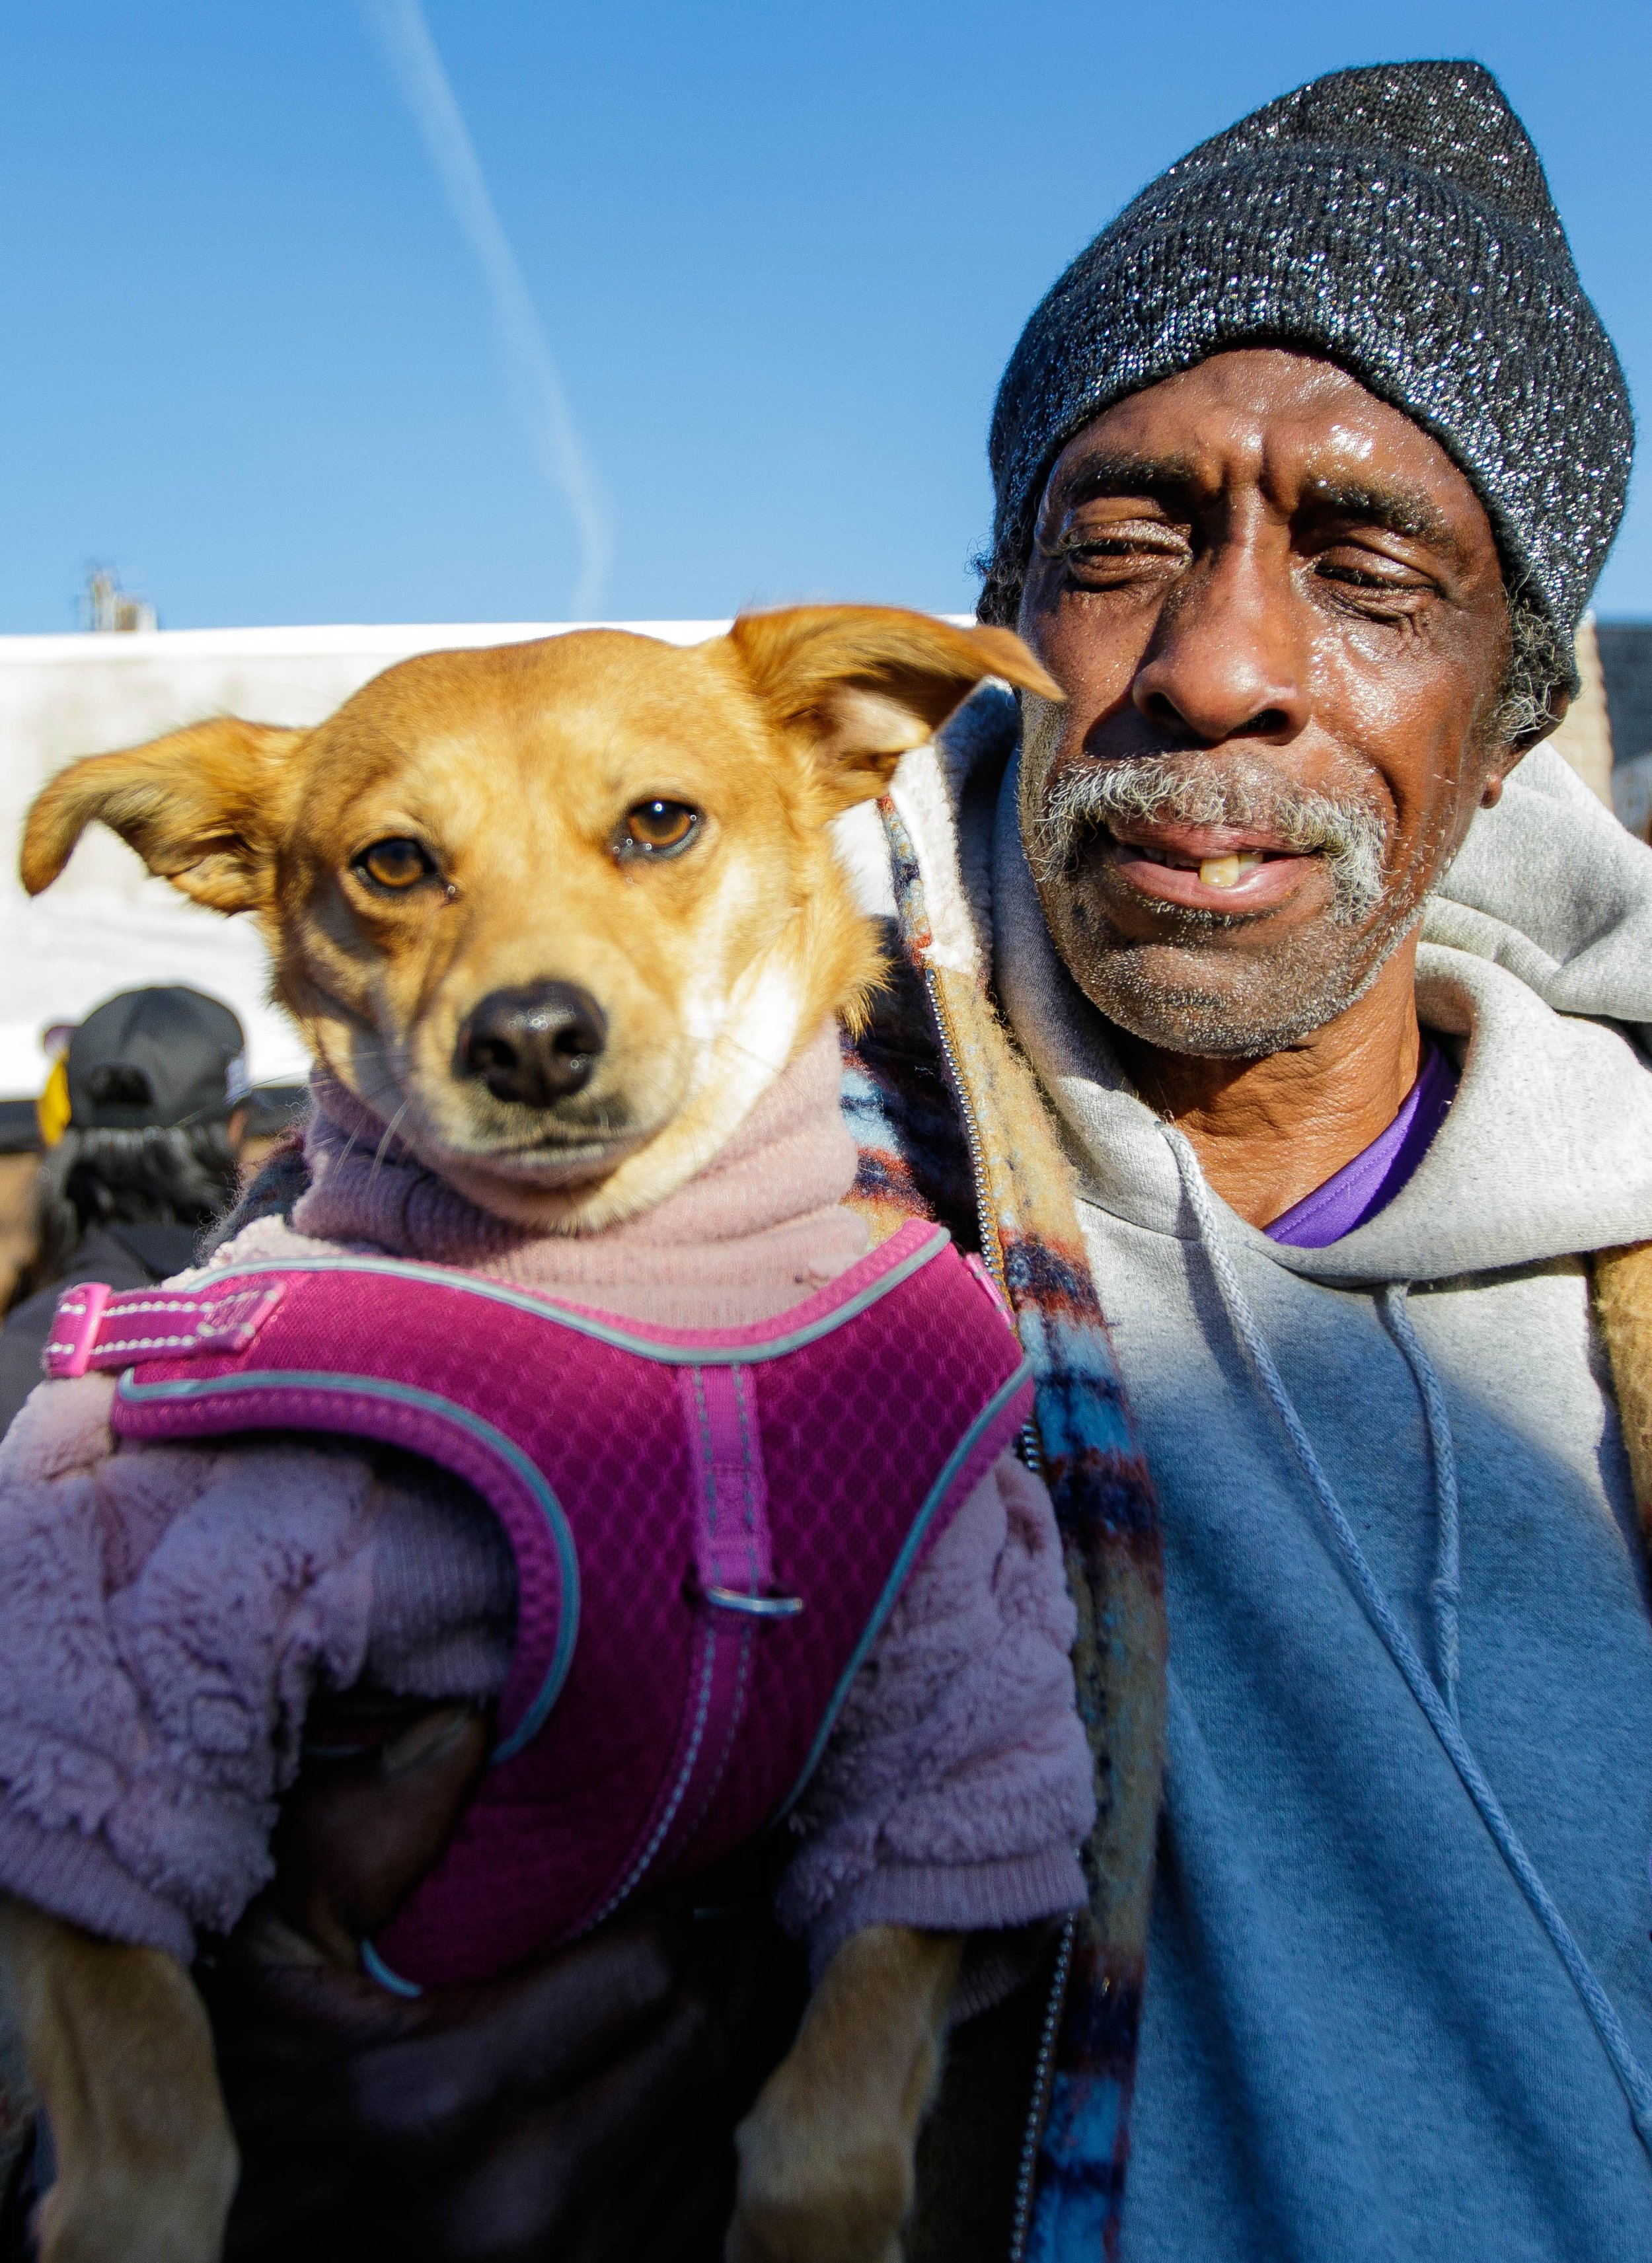  62-year-old Steven Sheffield and his dog Princess line up for free food at the Lost Angels Org Thanksgiving event. Sheffield got Princess 4 months ago after the passing of his wife and has been living in homeless centers with her. Lost Angels Org is